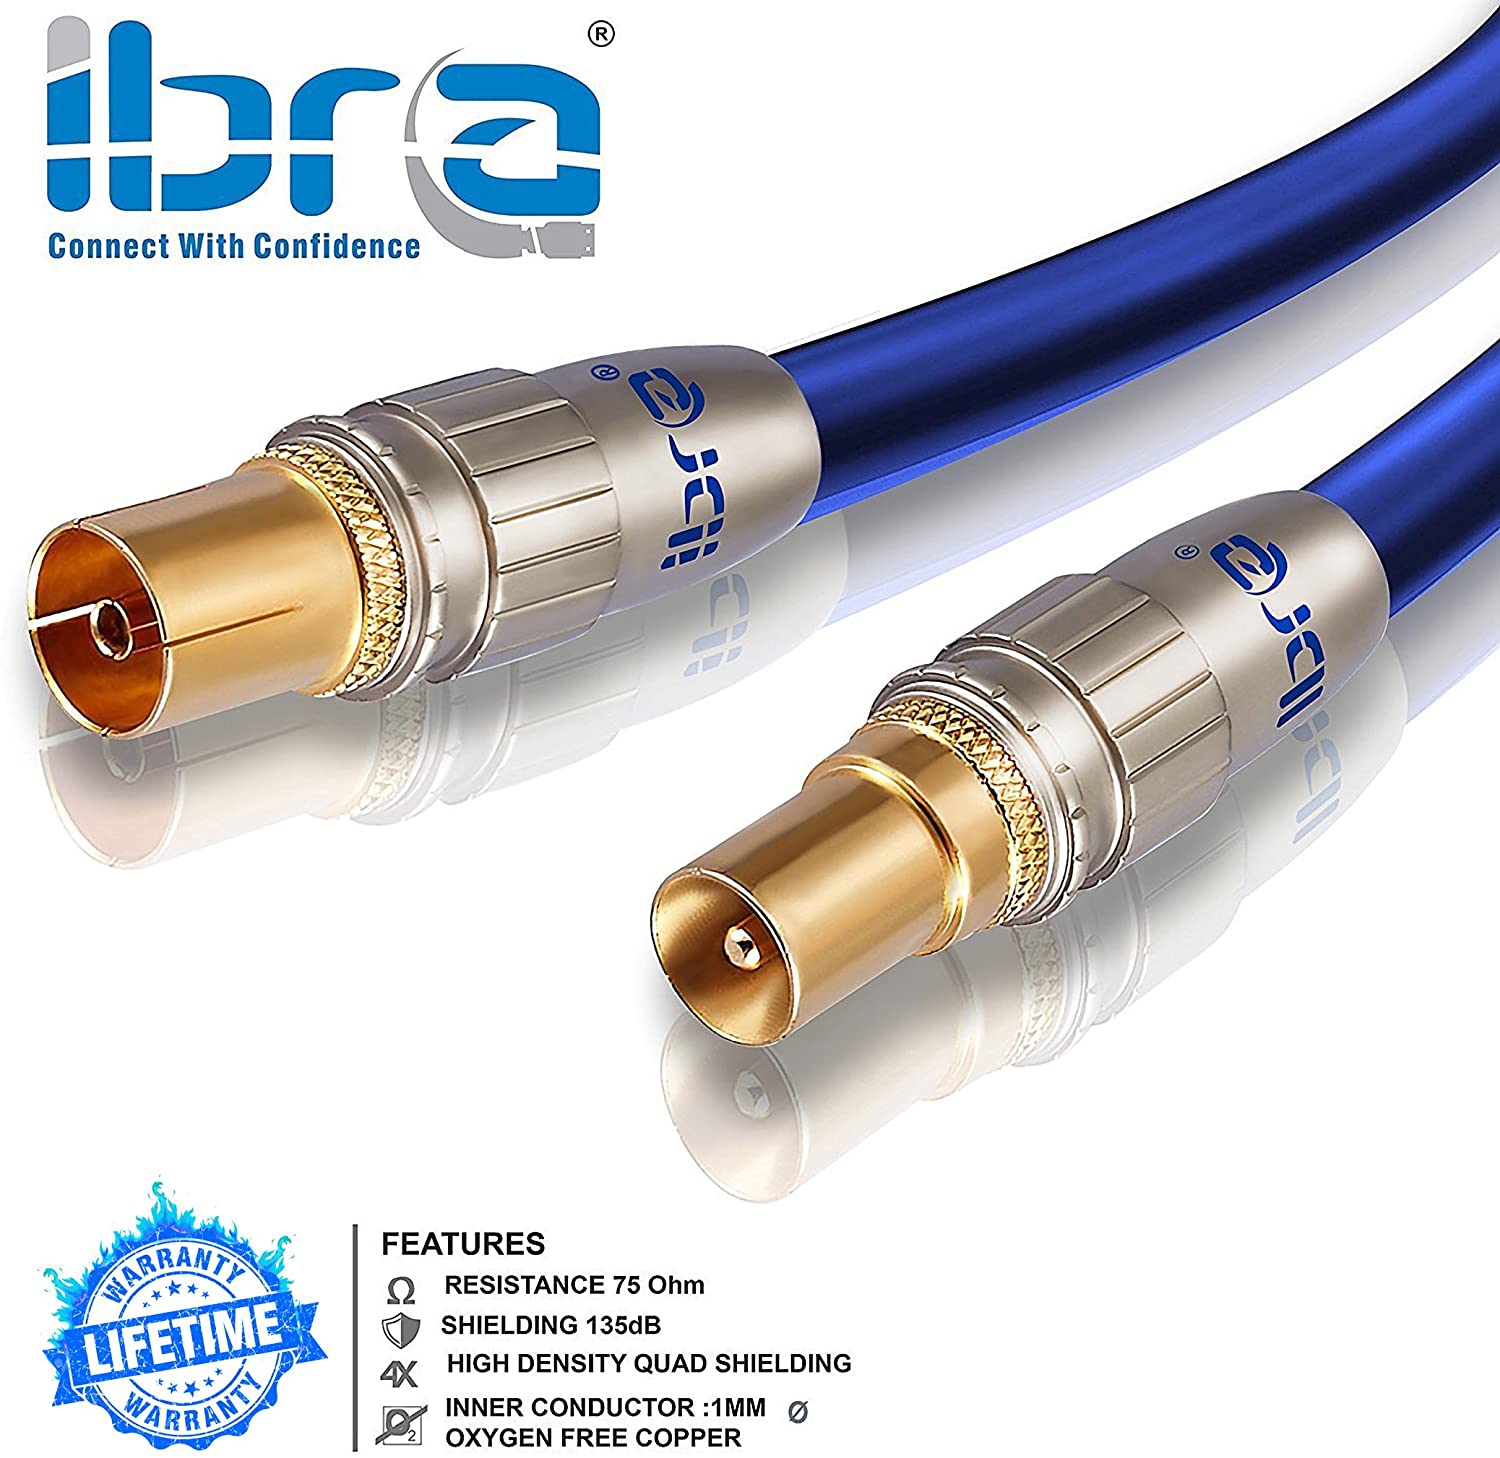 7.5m HDTV Antenna Cable|TV Aerial Cable|Premium Coaxial Cable|Connectors: Coax Male to Coax Female|For UHF/RF/DVB-T/DVB-T2 TVs, VCRs, DVD players, DVRs, cable boxes and satellite| IBRA Blue Gold